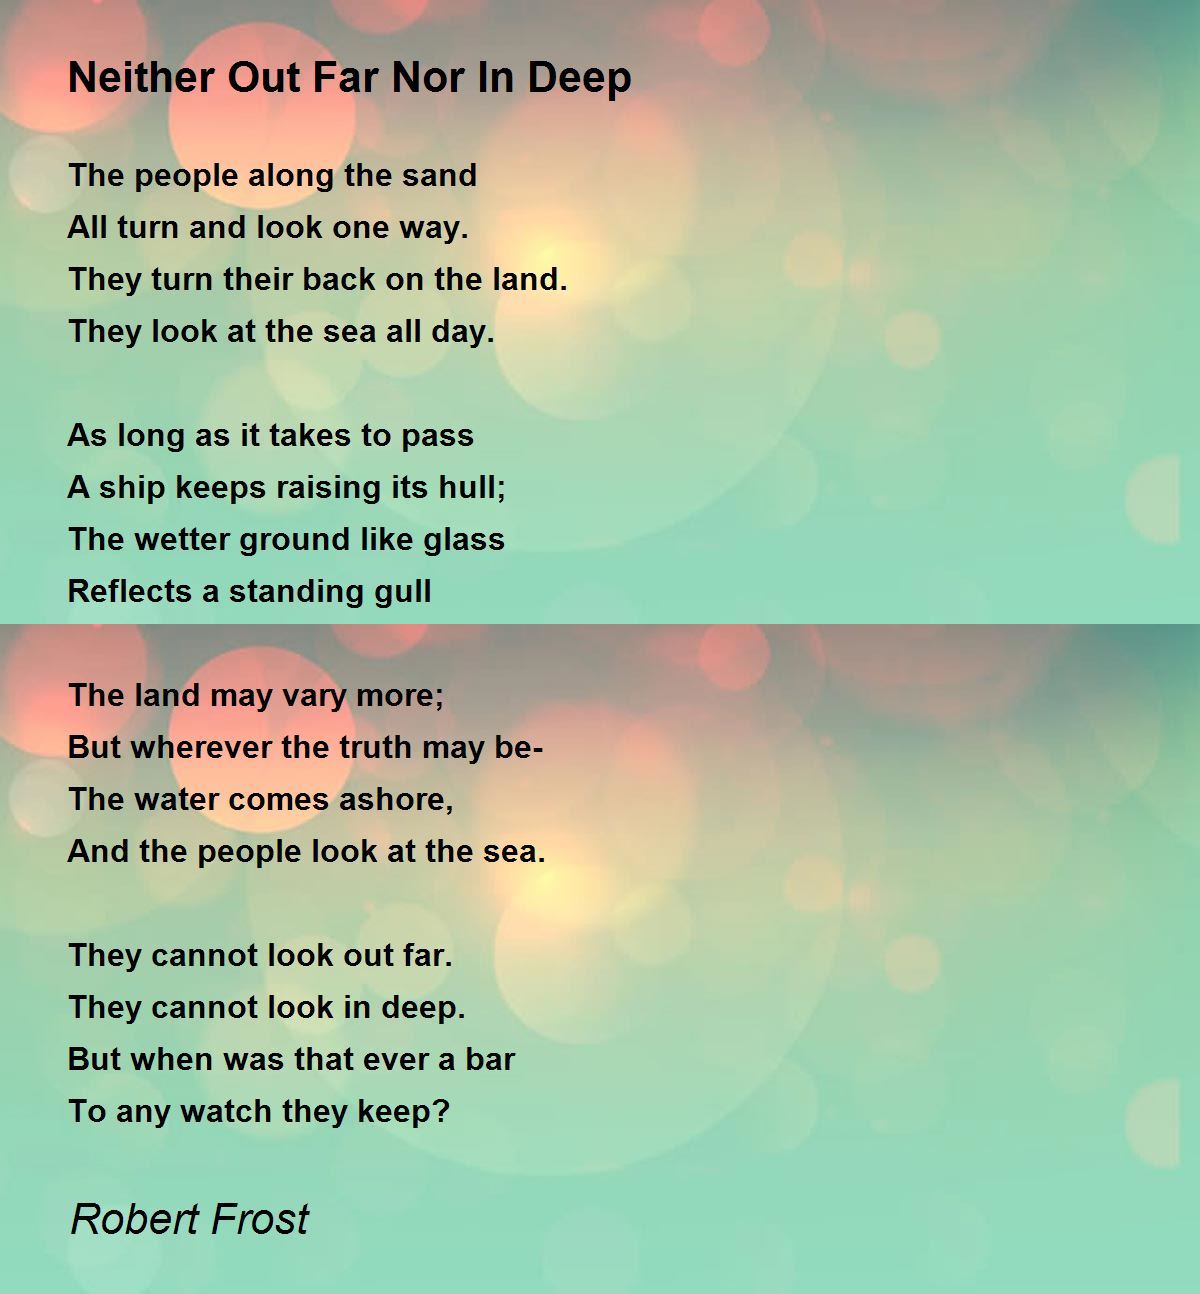 Looking Out By Robert Frost